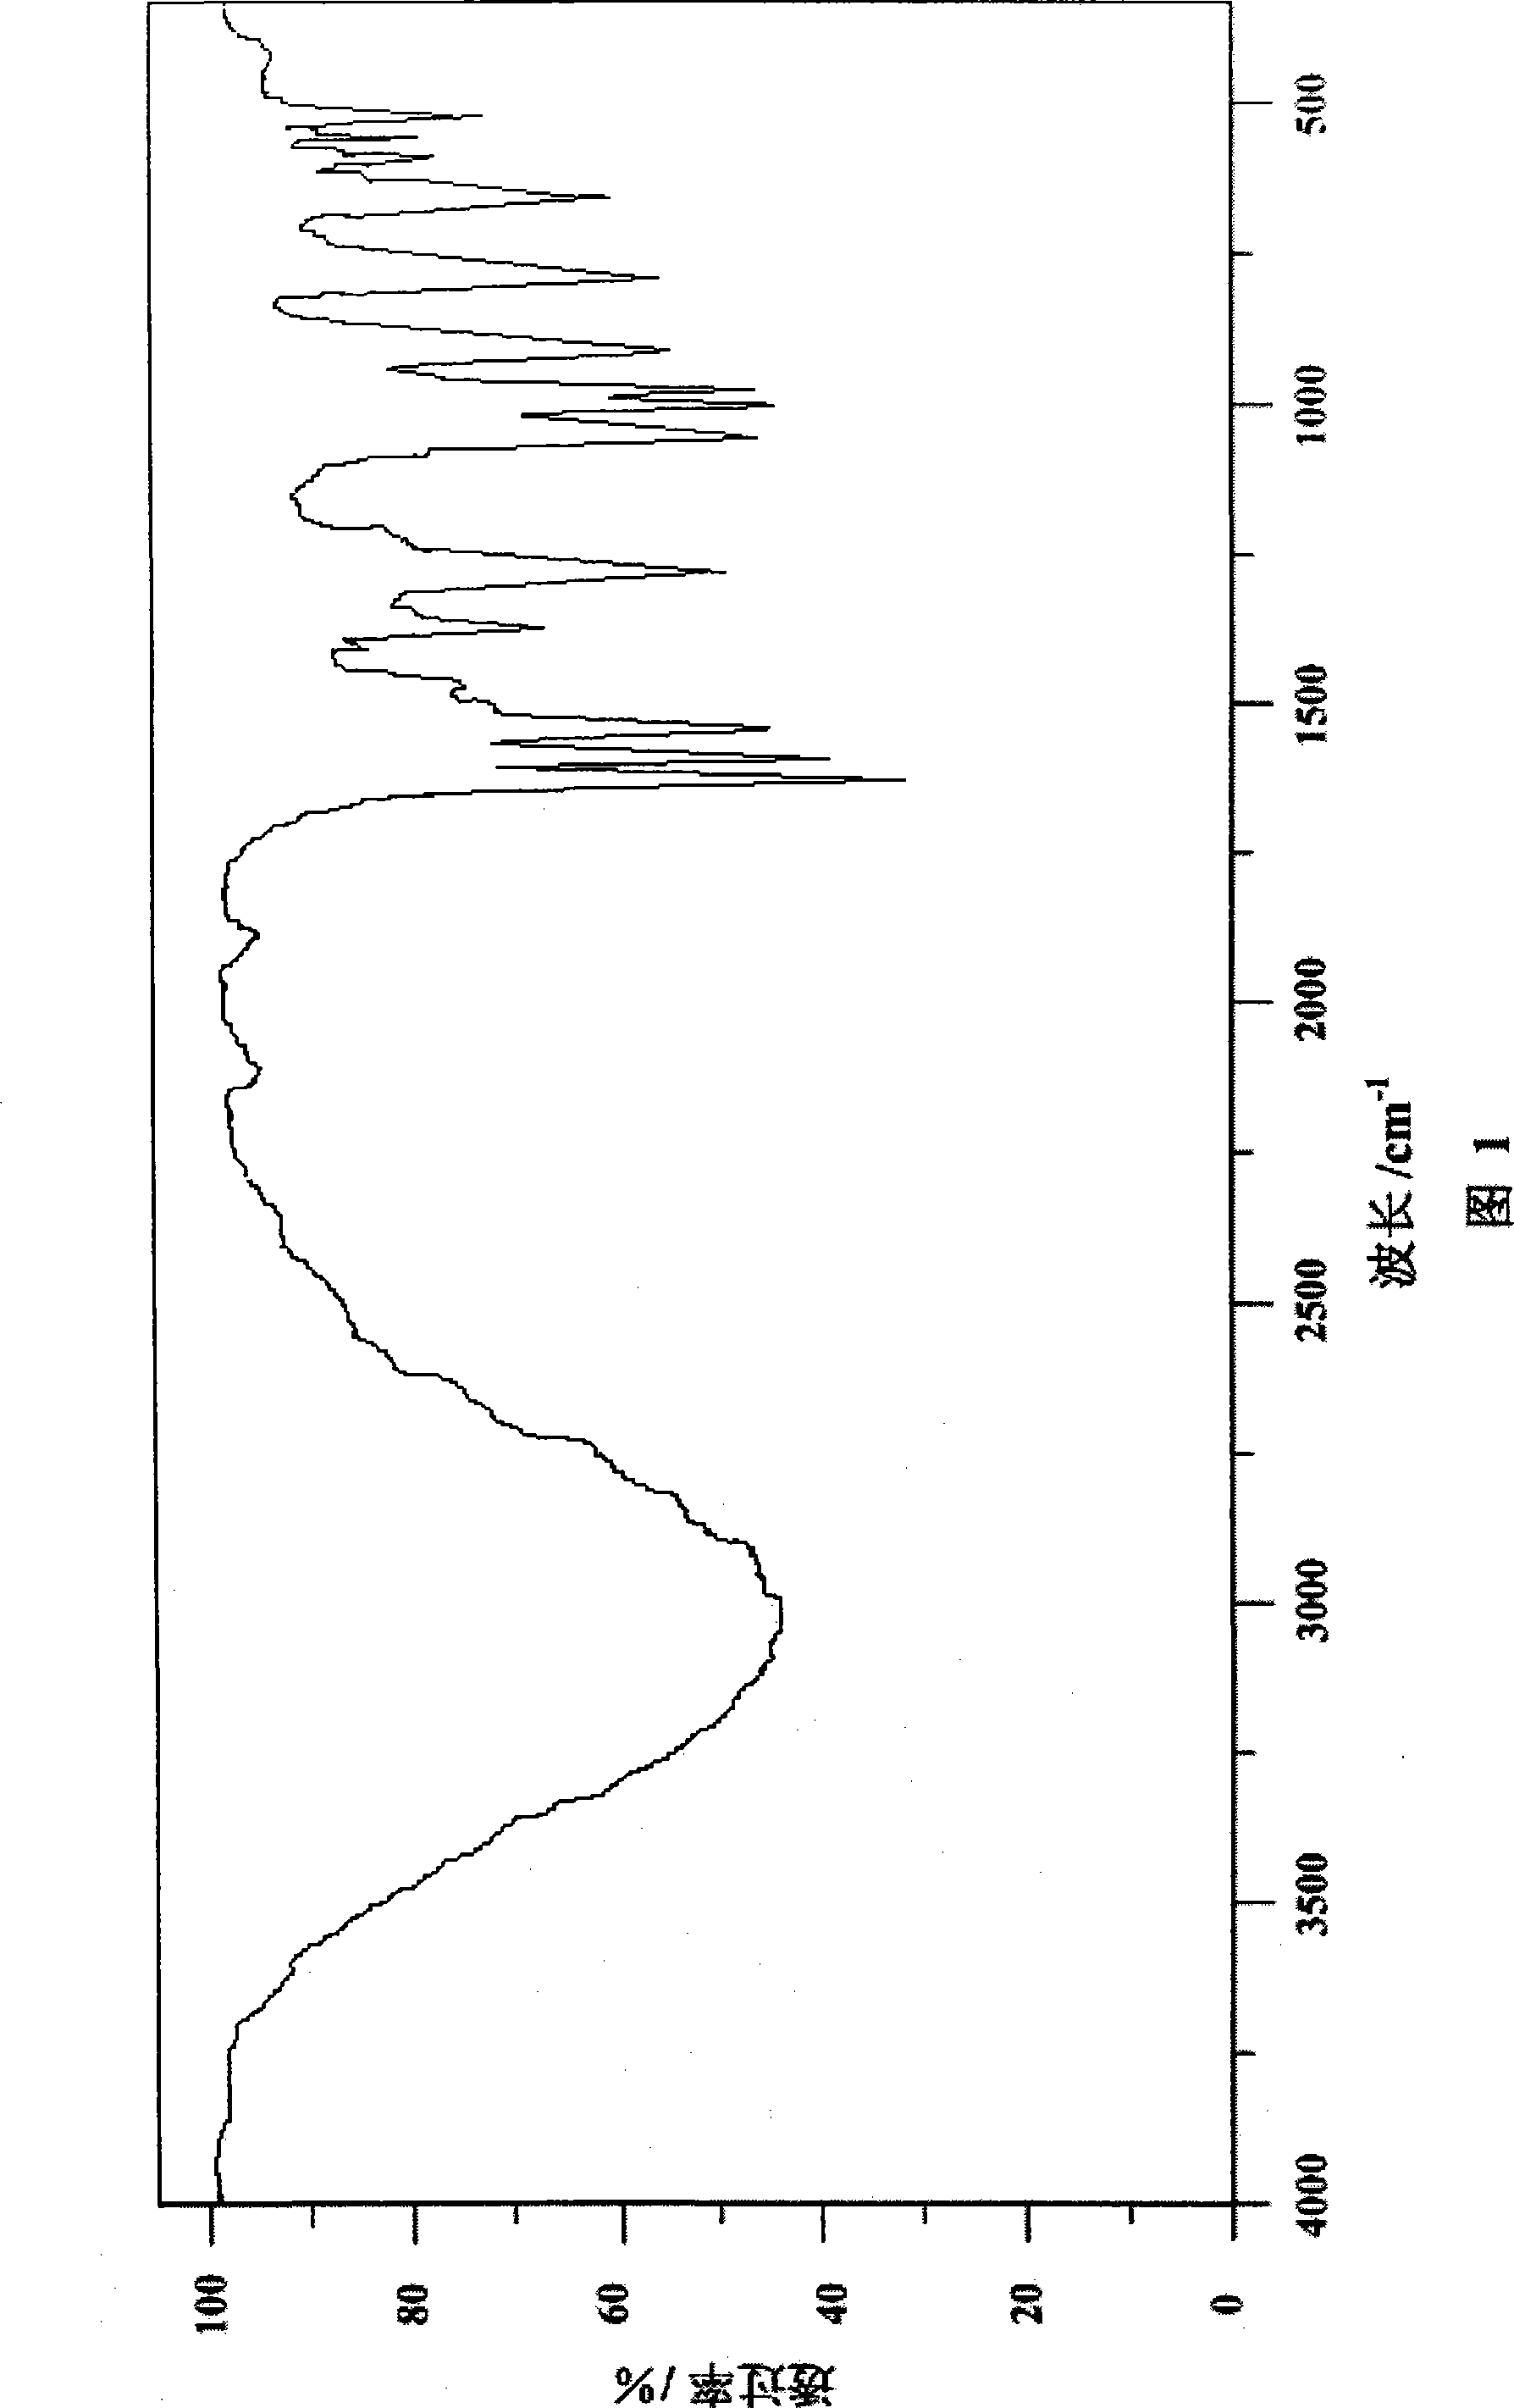 Phosphor-nitrogen expansion type combustion inhibitor and method of producing the same